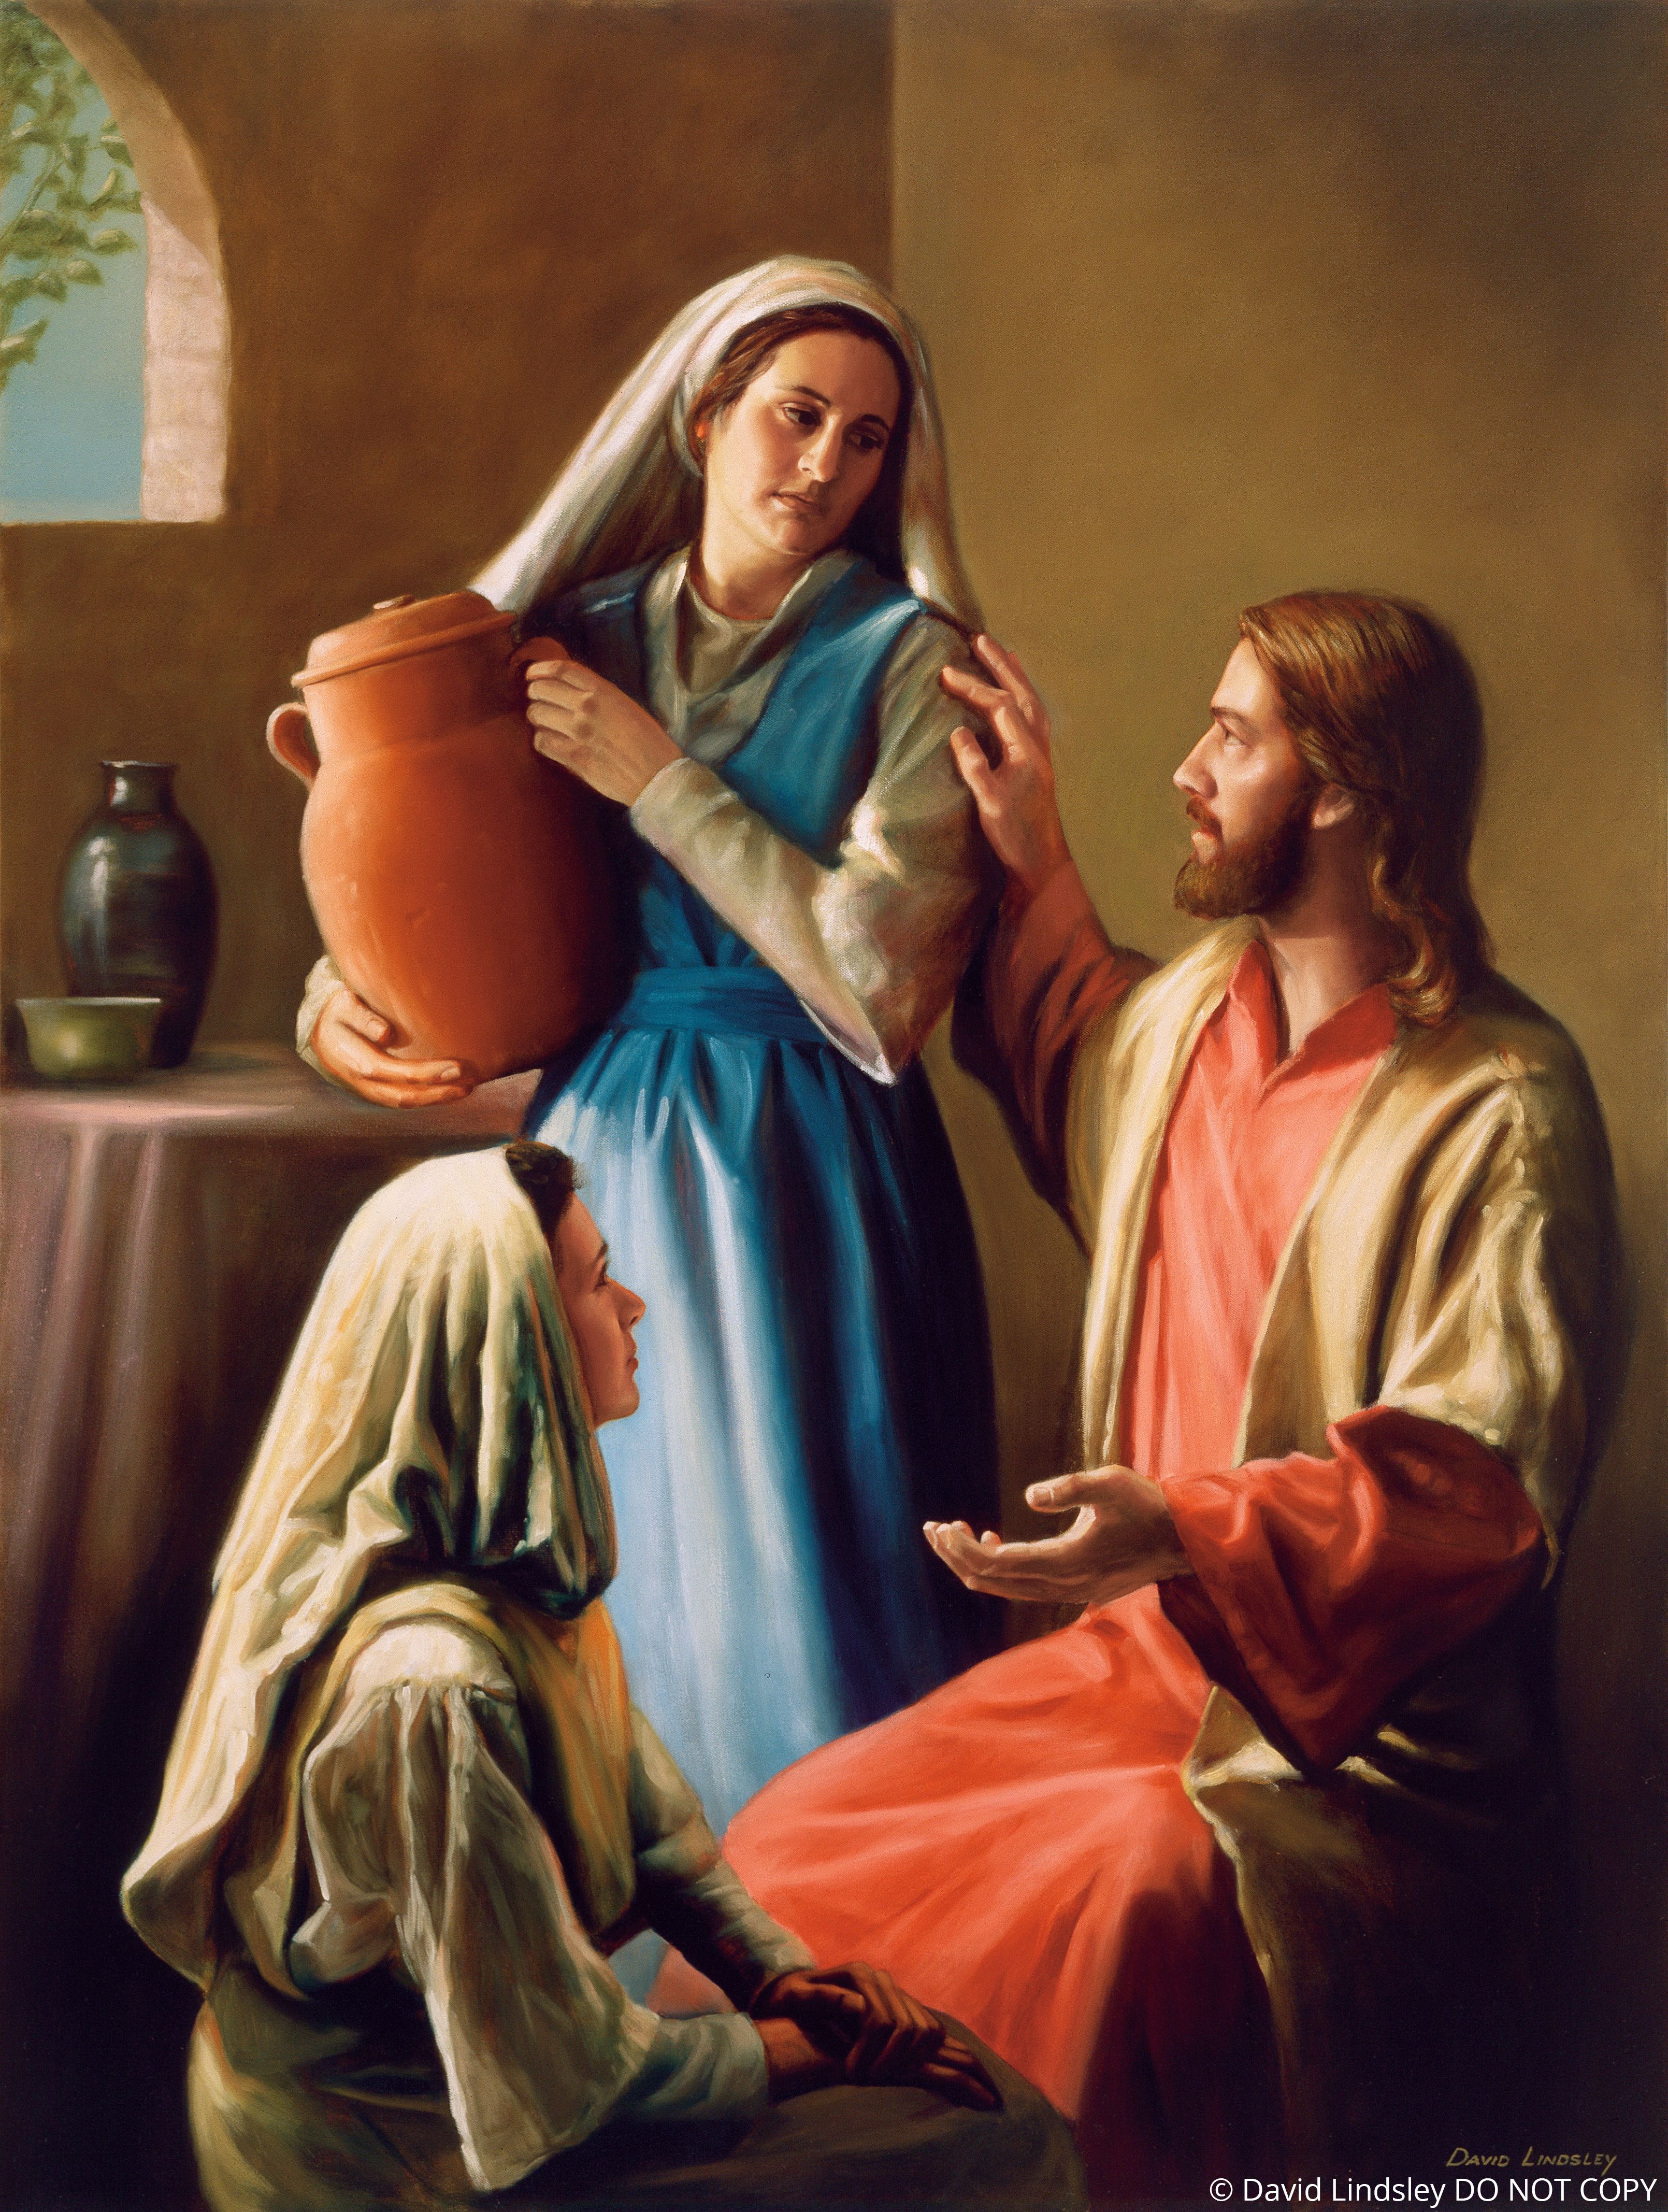 Christ in the Home of Mary and Martha (Mary and Martha), by David Lindsley; GAB 45; Luke 10:38–42; © David Lindsley: DO NOT COPY. This asset is for Church use and online viewing only.